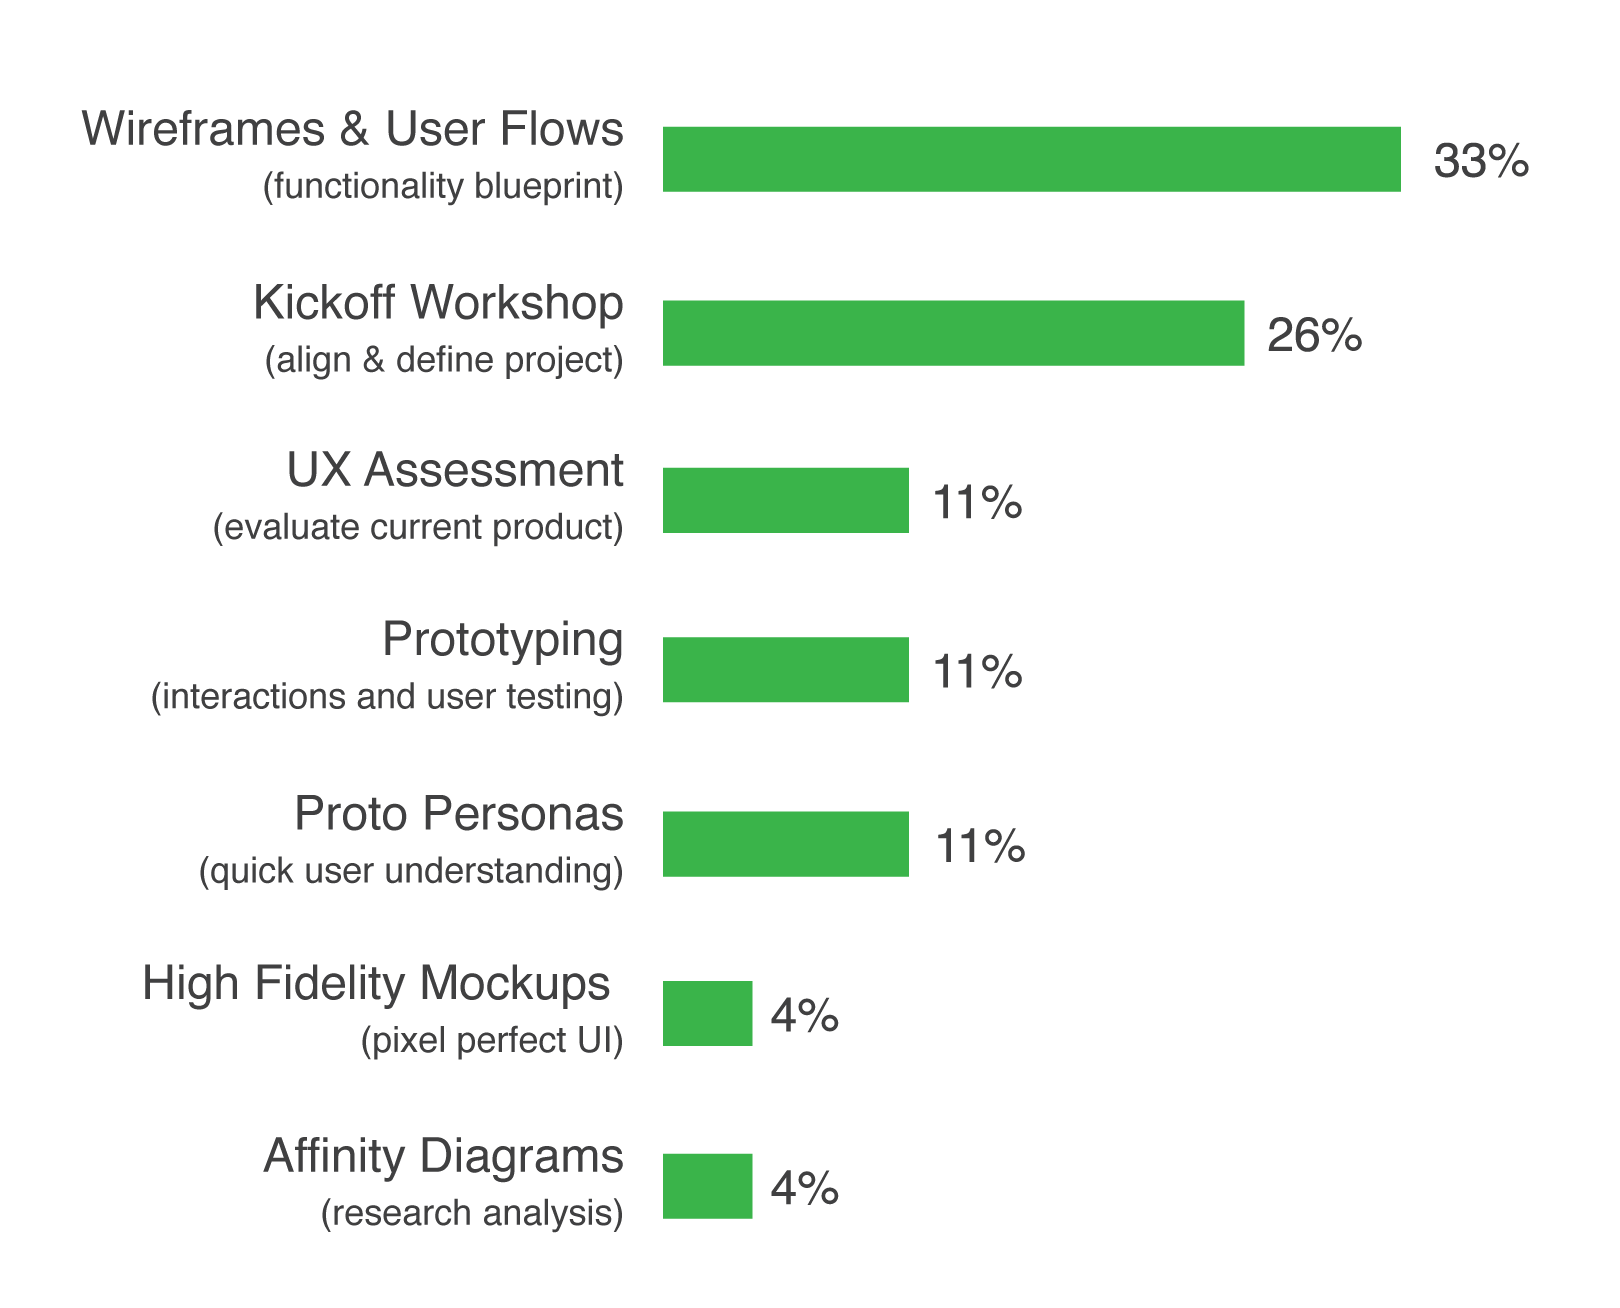 Poll: Wireframes & User Flows 35%, Kickoff Workshop - 27%, UX Assessment 12%, Prototyping 12%, Proto Personas 8%, High Fidelity Mockups 4%, Affinity Diagrams 4%